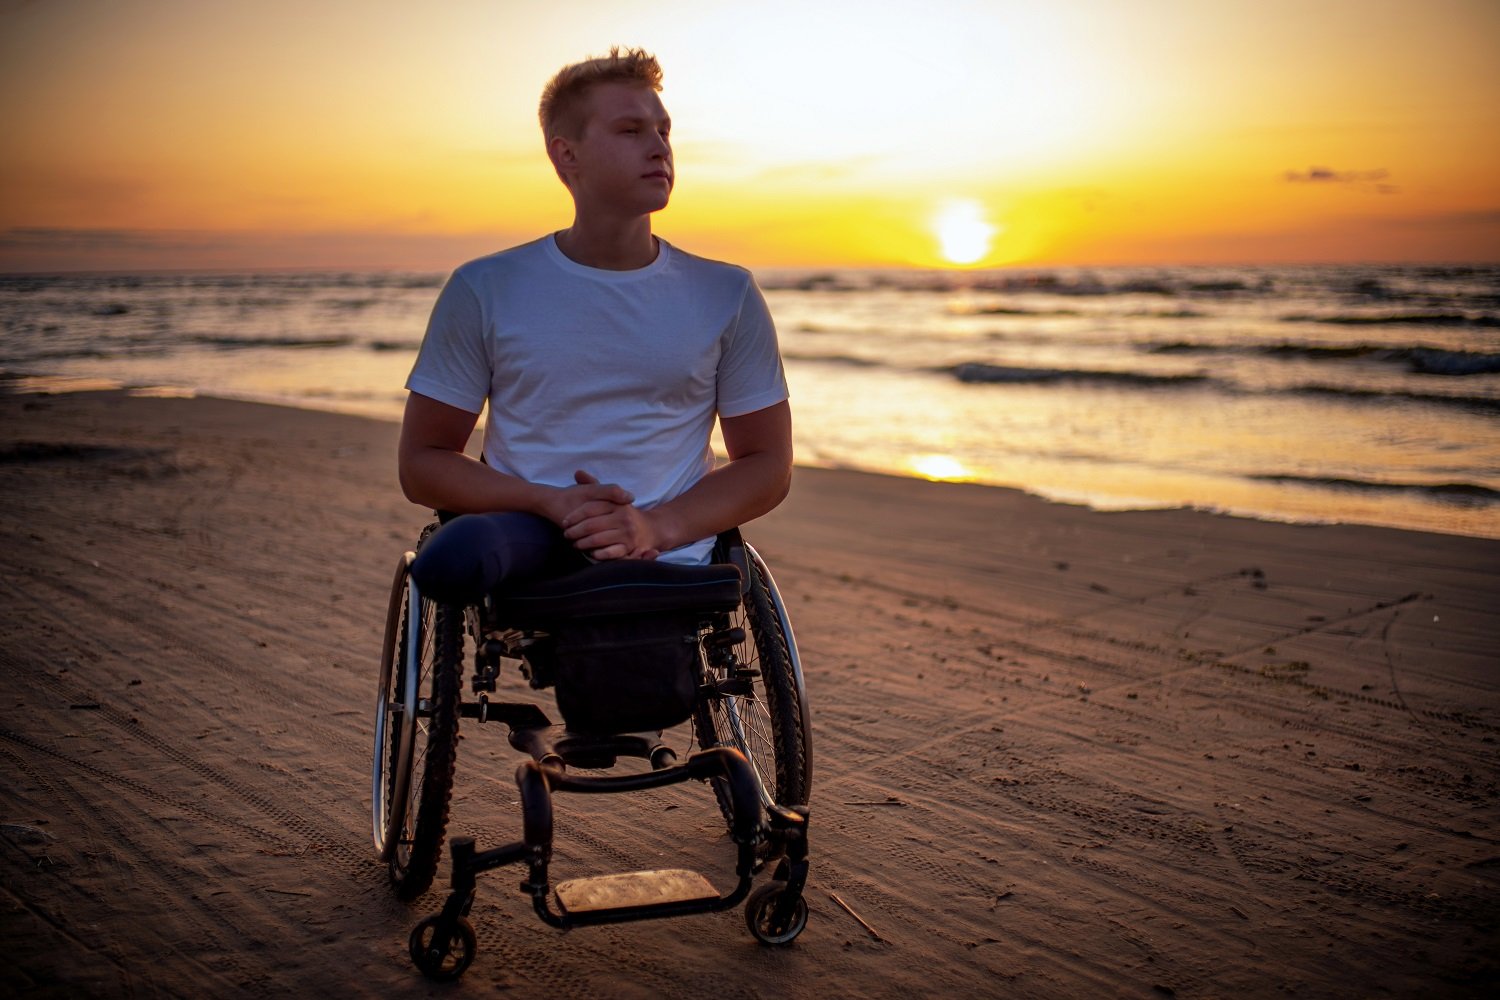 Handicapped man in wheelchair alone on a beach at sunset.